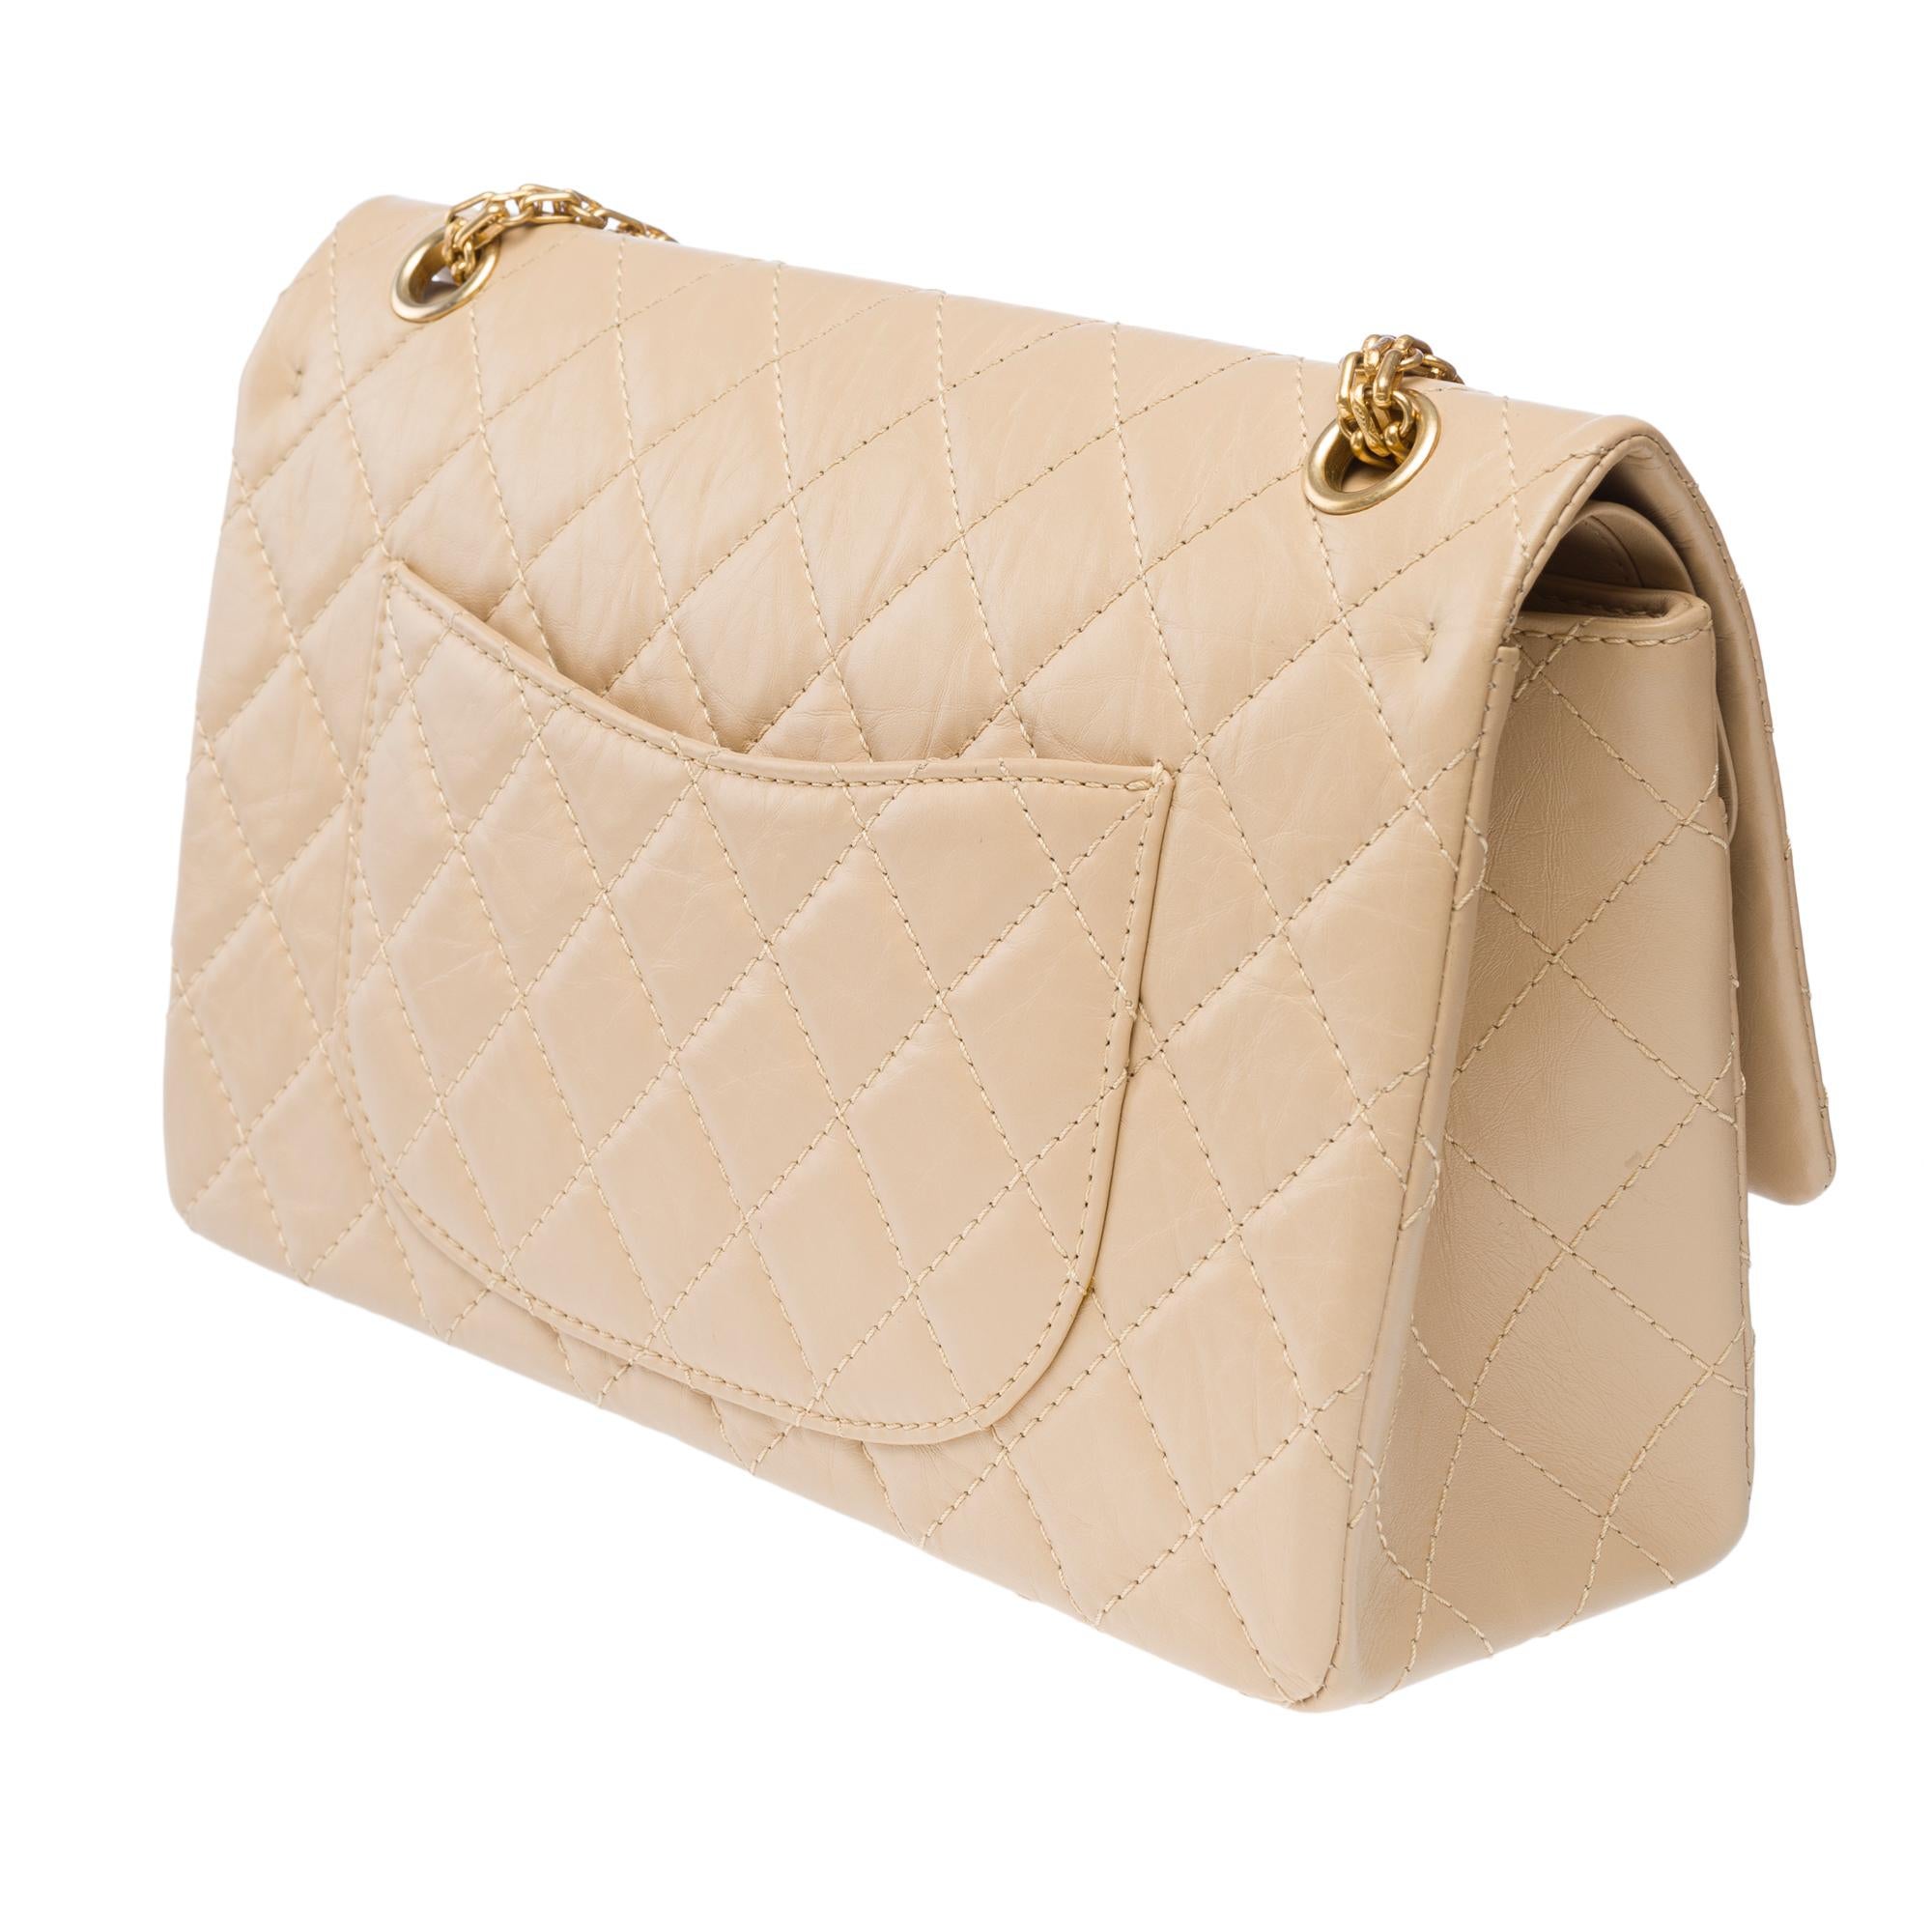 Iconic Chanel 2.55 double flap shoulder bag in quilted beige leather, GHW For Sale 3